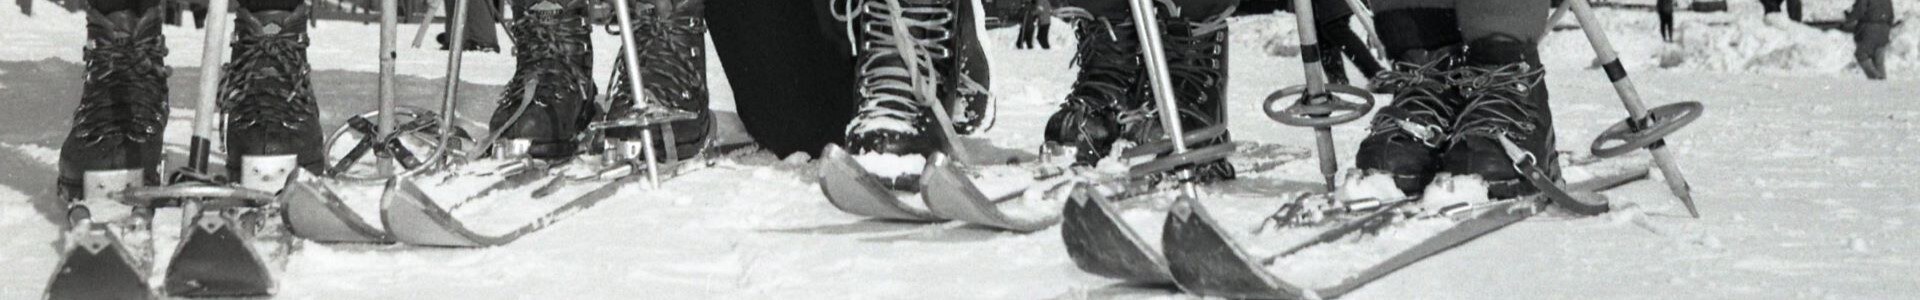 old-time boots and skis